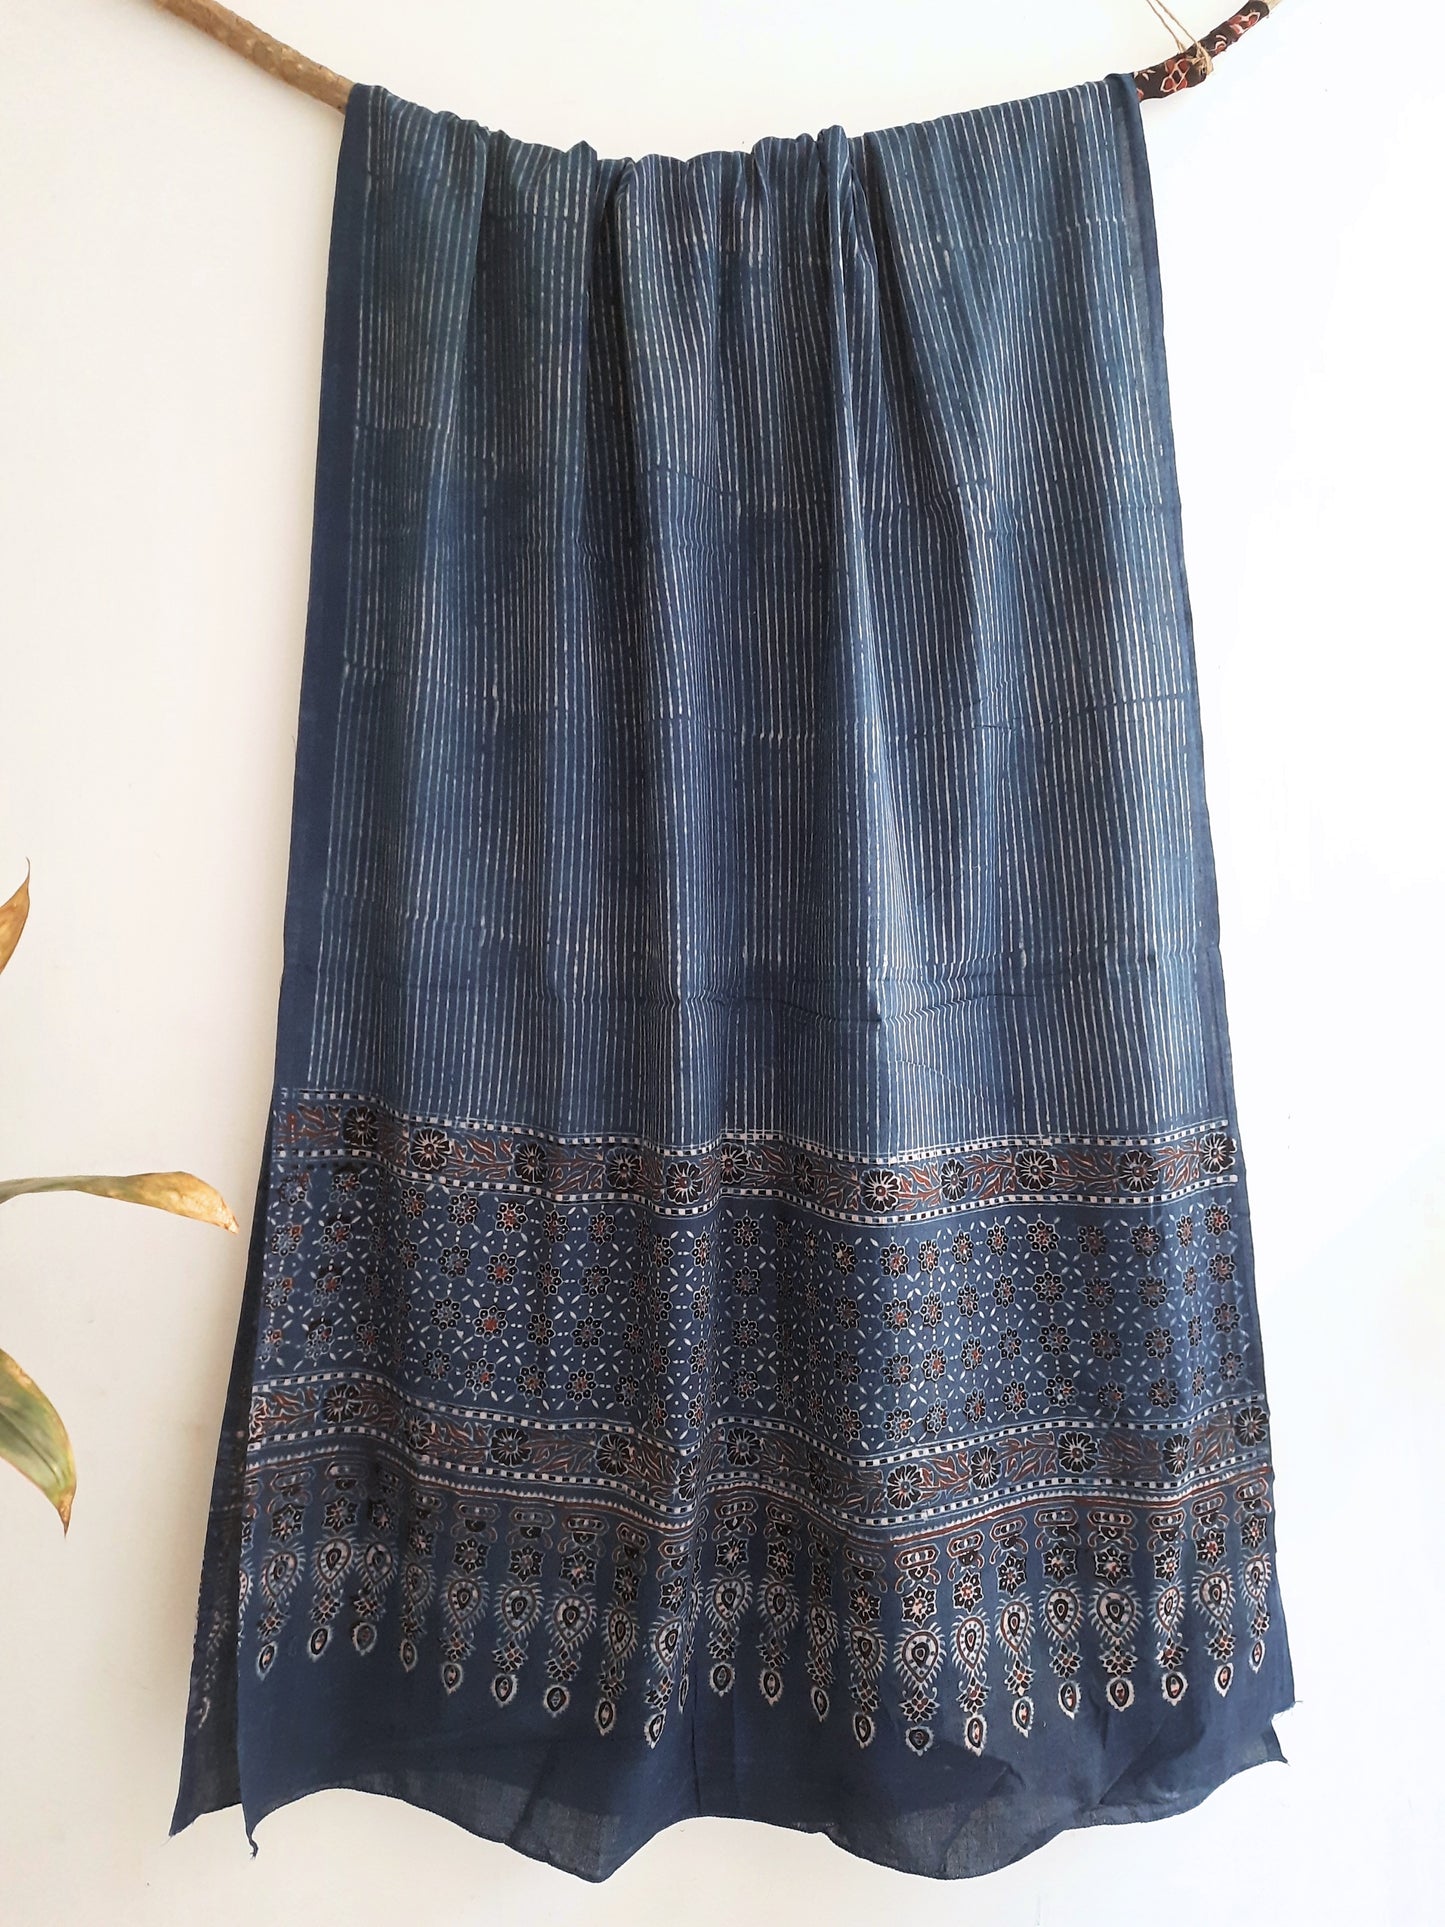 "Indigo Dyed Stripes Cotton Dupatta - Handcrafted using traditional ajrakh techniques, this sustainable and timeless piece adds artisanal charm to any outfit. A unique summer wardrobe update for eco-conscious fashion enthusiasts."